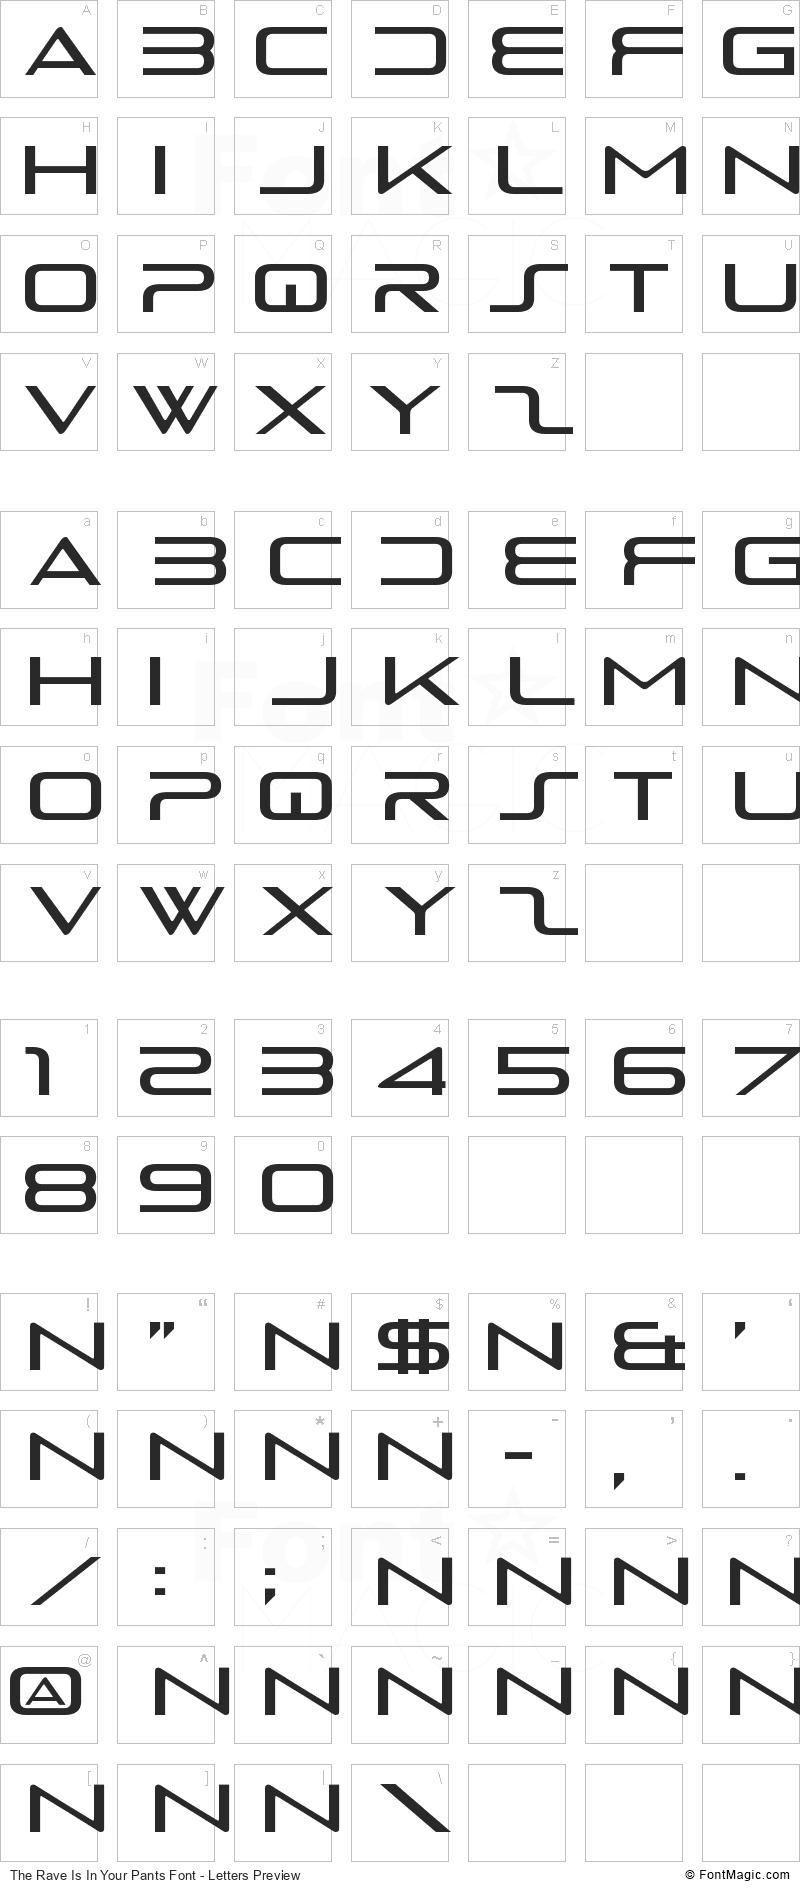 The Rave Is In Your Pants Font - All Latters Preview Chart